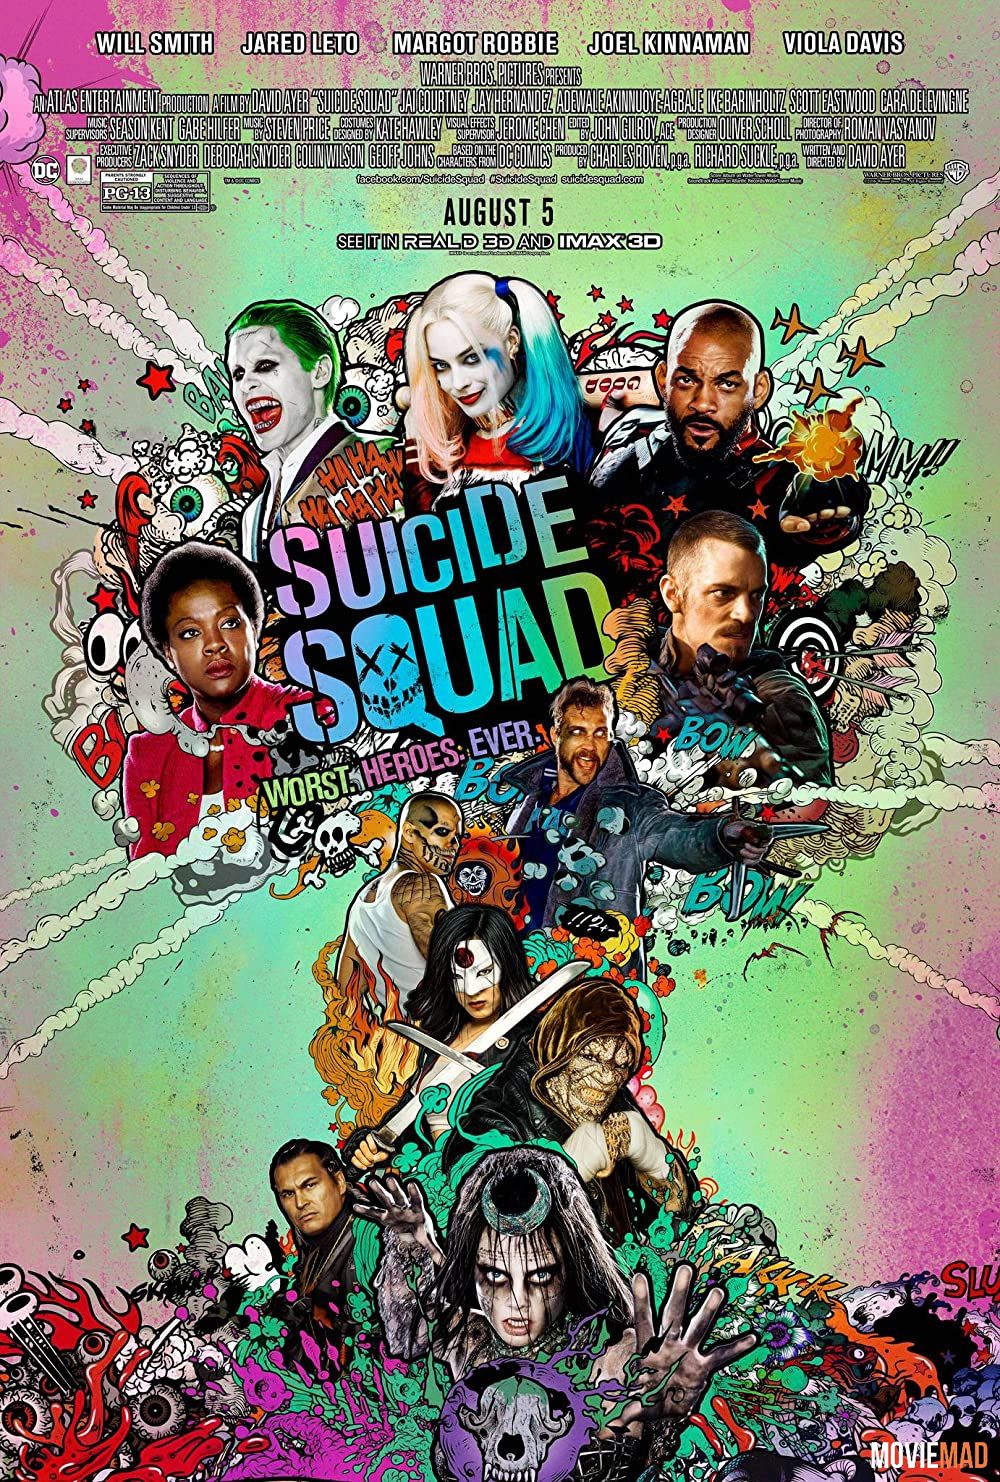 full moviesSuicide Squad (2016) EXTENDED Hindi Dubbed ORG BluRay Full Movie 1080p 720p 480p